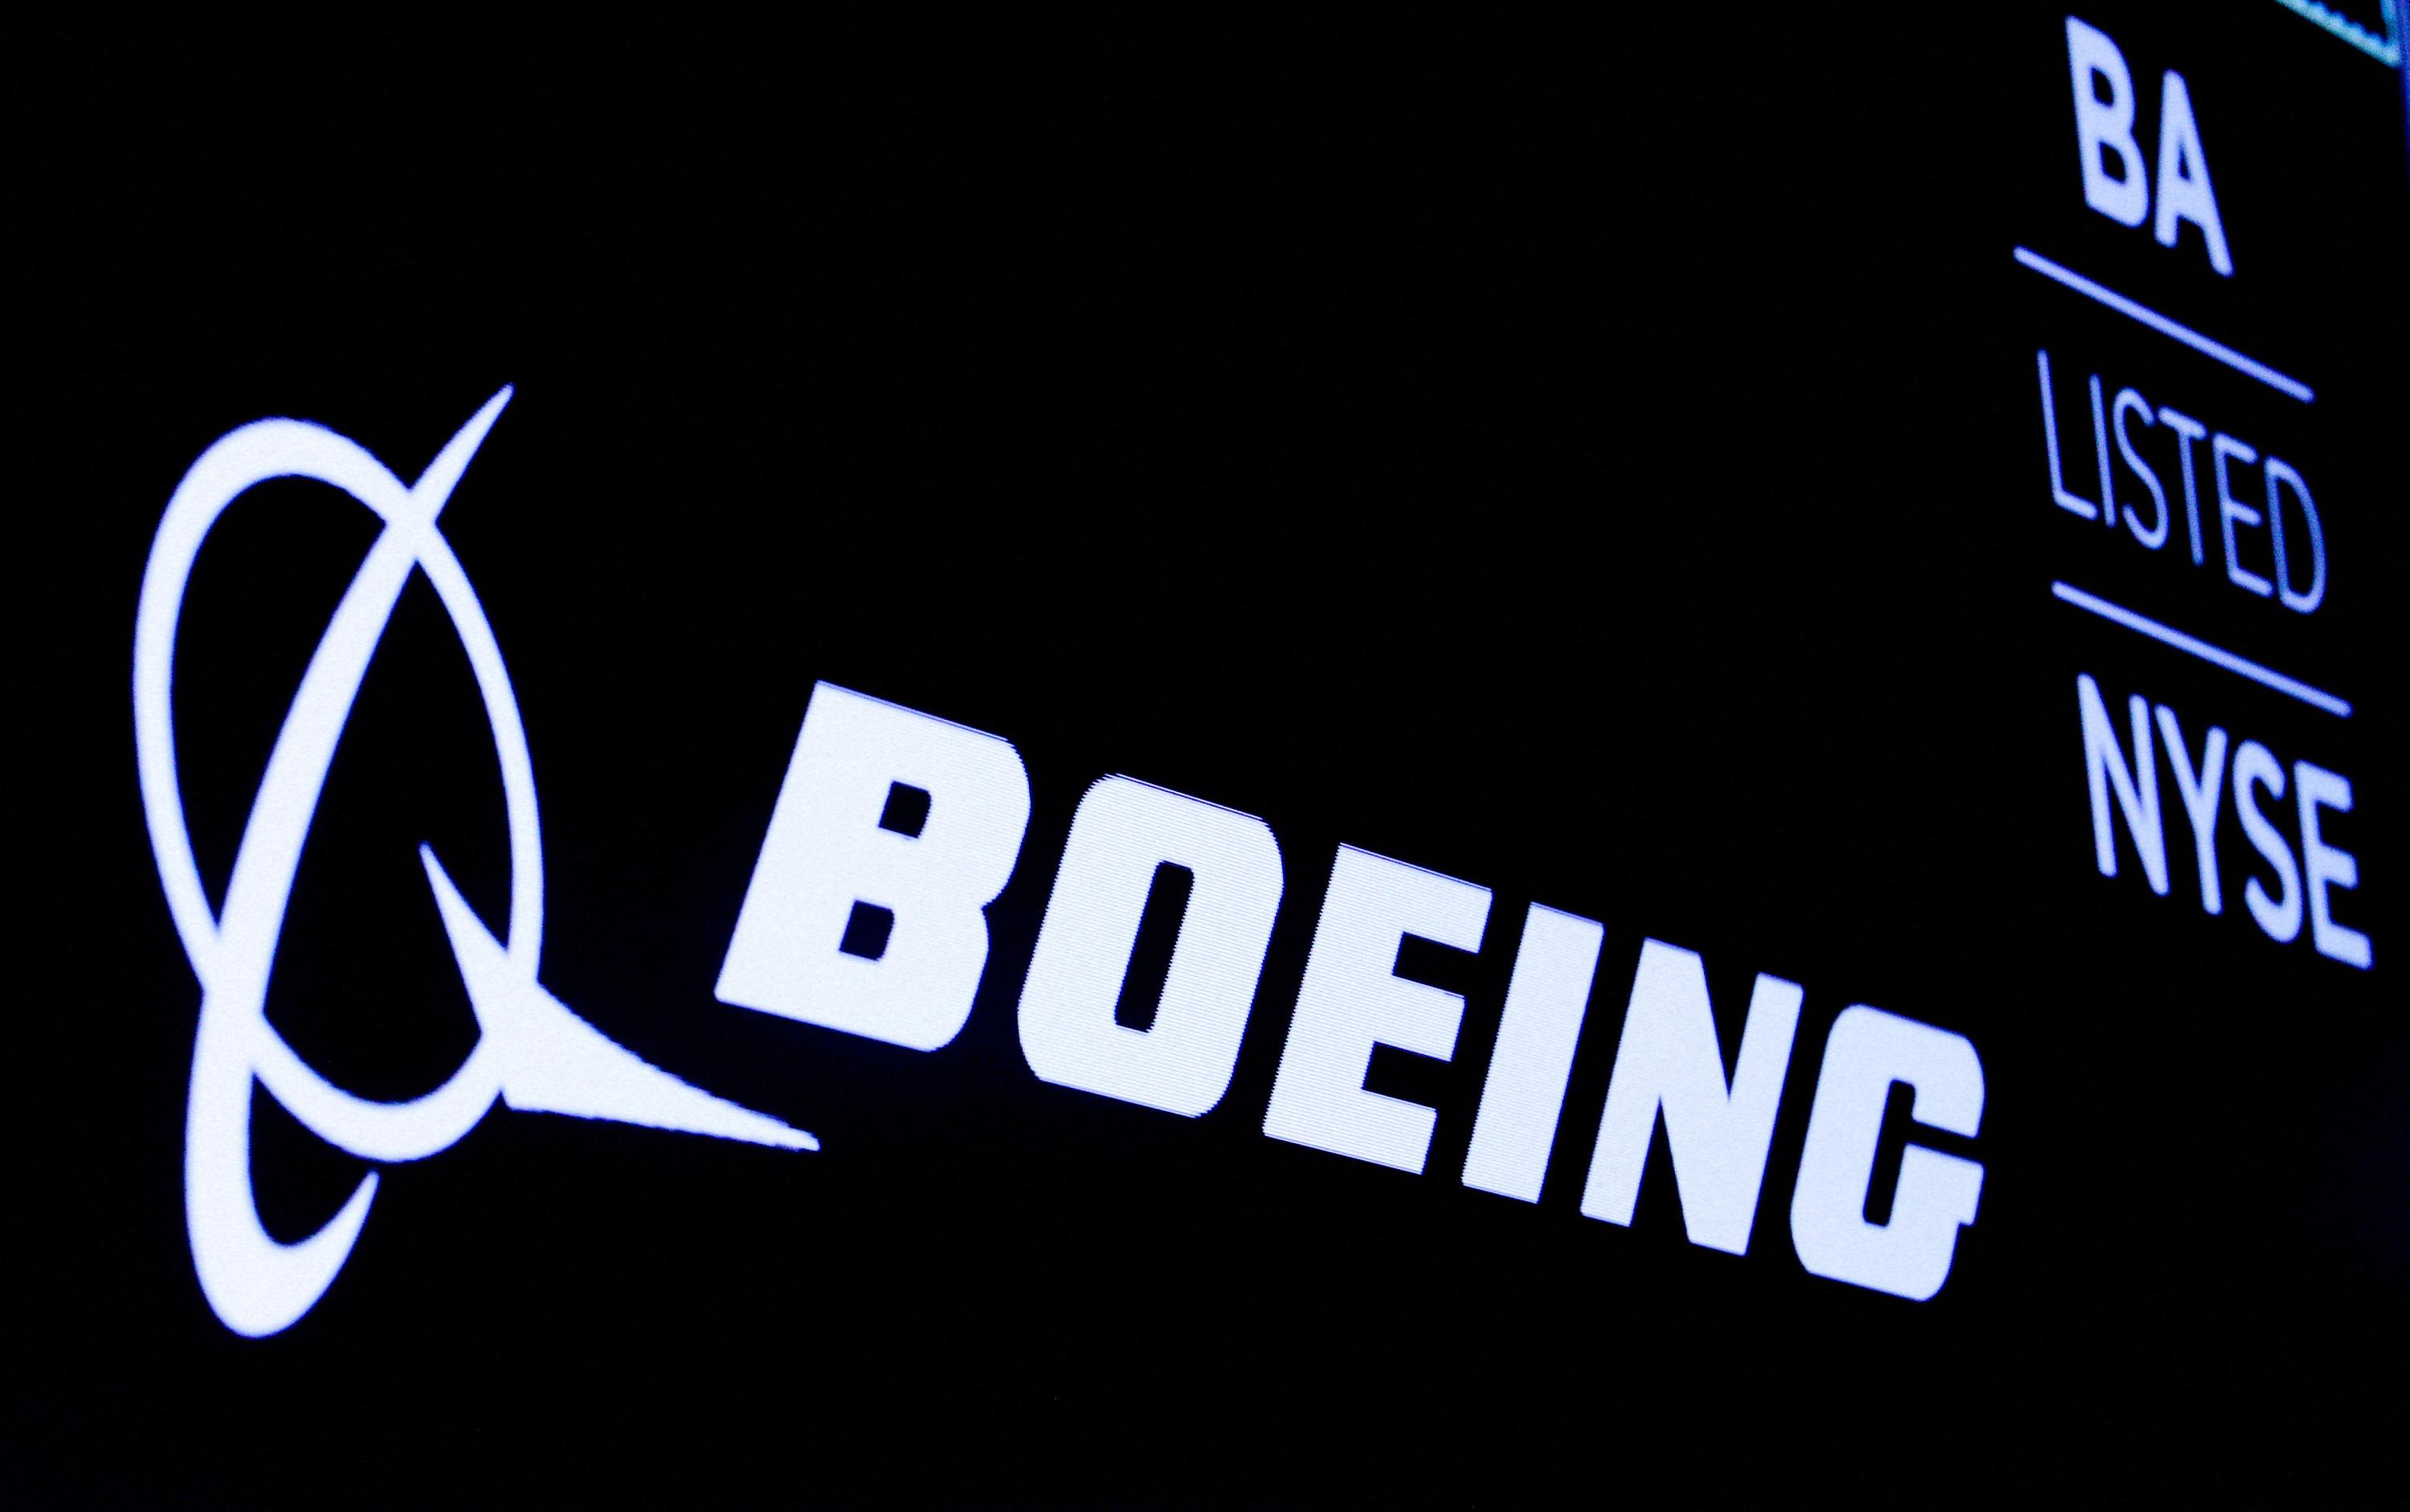 US regulator urges Boeing to commit to “real and substantial improvements”